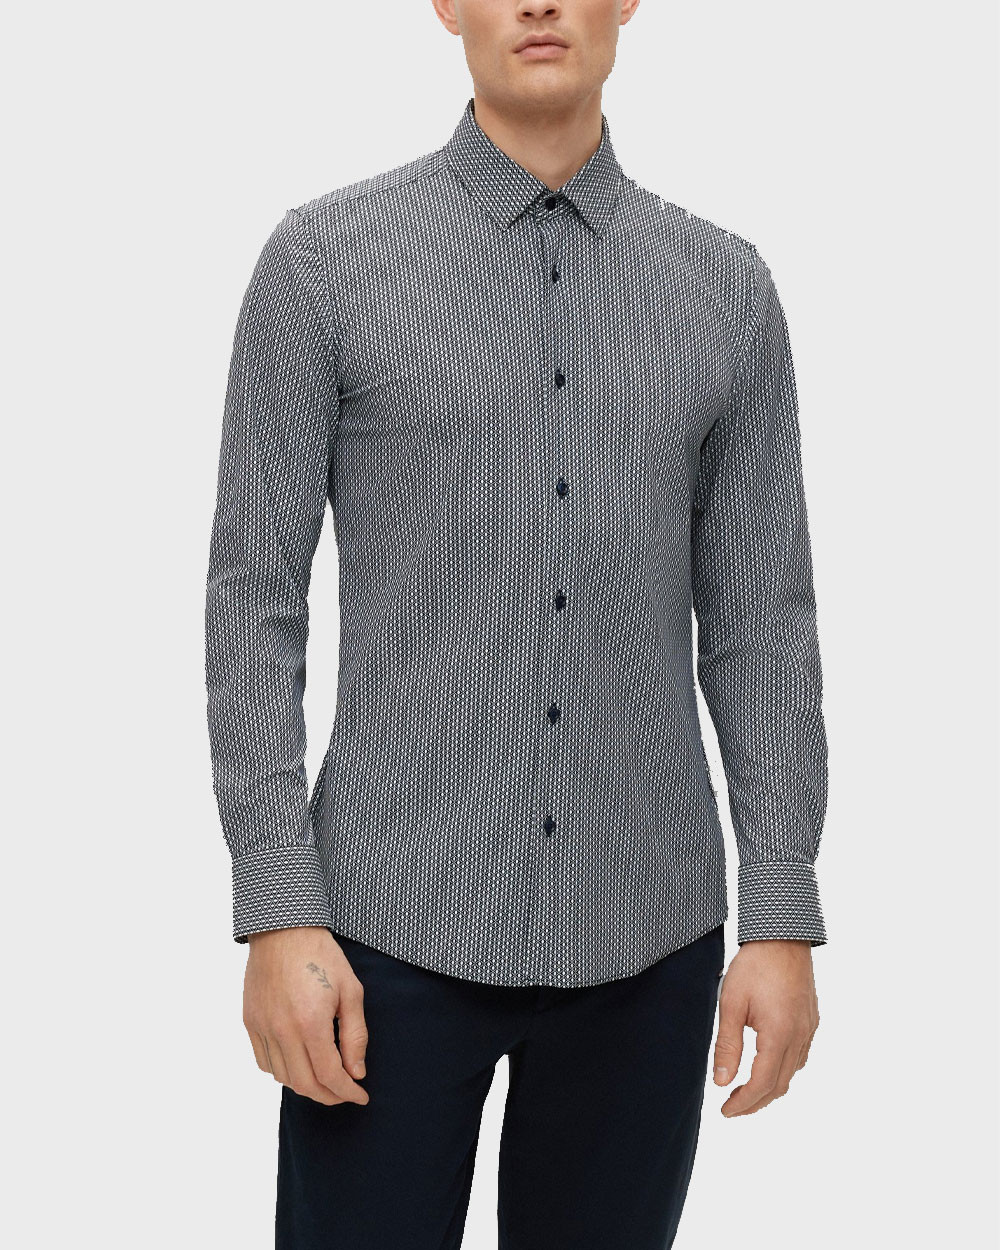 BOSS MEN'S SLIM-FIT SHIRT IN PRINTED PERFORMANCE STRETCH JERSEY